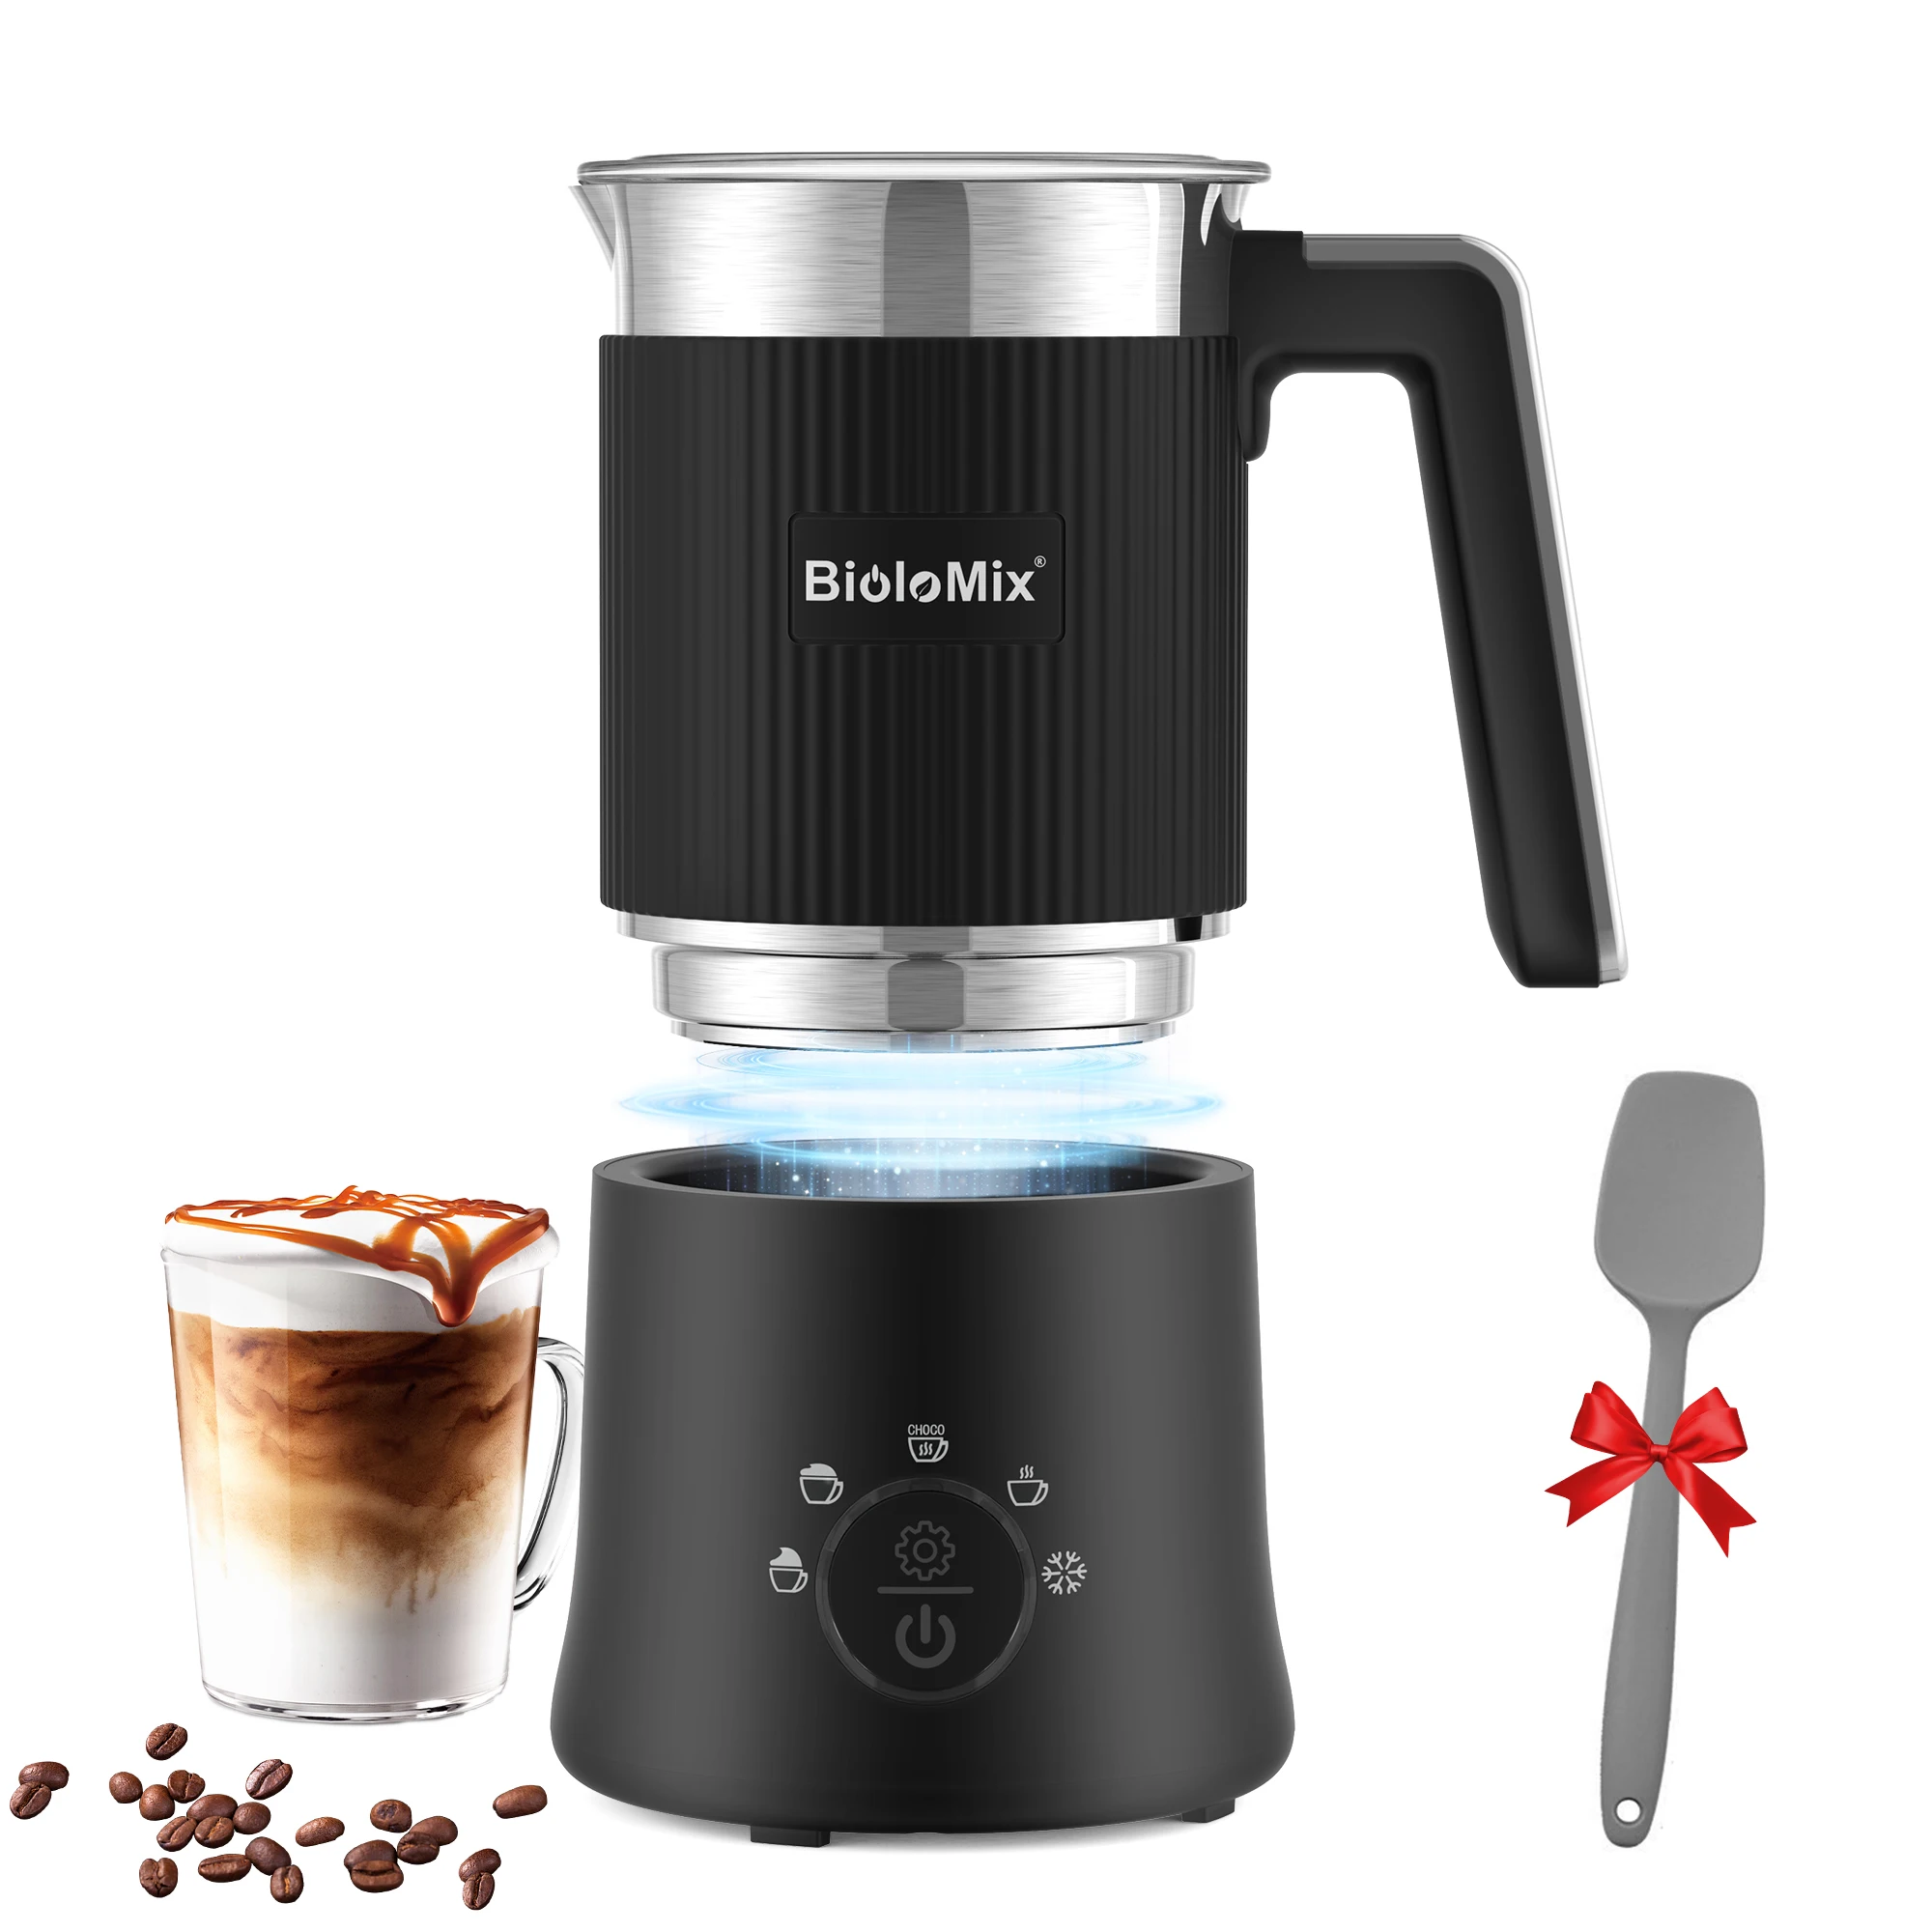 5 in 1 Detachable Milk Frother Frothing Foamer Automatic Milk Warmer Cold/Hot Latte Cappuccino Chocolate Protein Powder biolomix bn11 4 in 1 hot and cold milk frother 150ml frothing capacity 300ml heating capacity